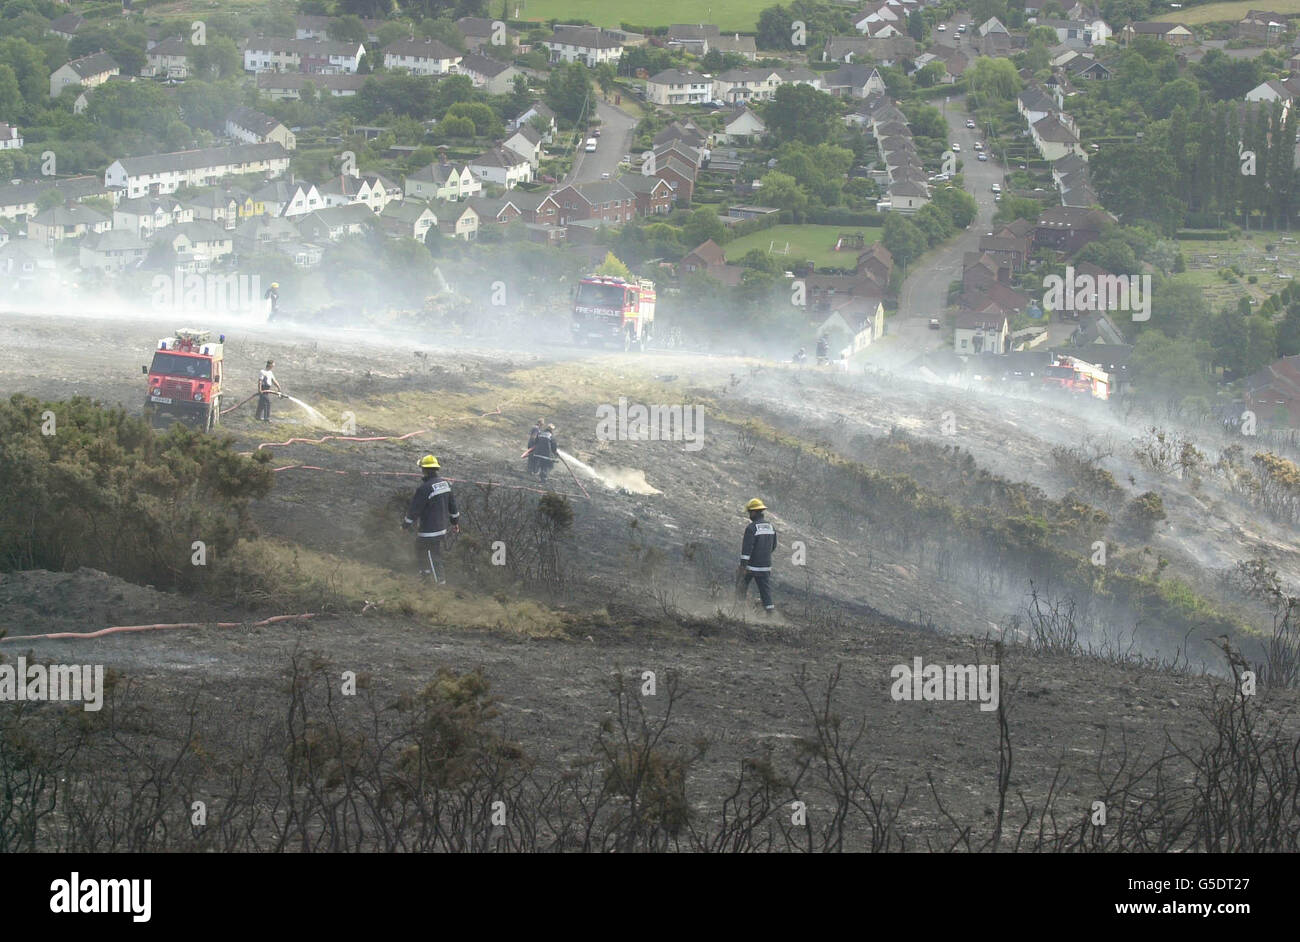 Fire crews battling with rising winds as they try to control a heathland blaze which has destroyed around 30 acres spreading across gorse and heathland on North Hill beauty spot that overlooks Minehead, Somerset. Holidaymakers on a campsite near the blaze were evacuated. *The blaze broke out over four acres of gorse, with fire crews and specialist units from Somerset and neighbouring Devon working to control it through the night. Stock Photo